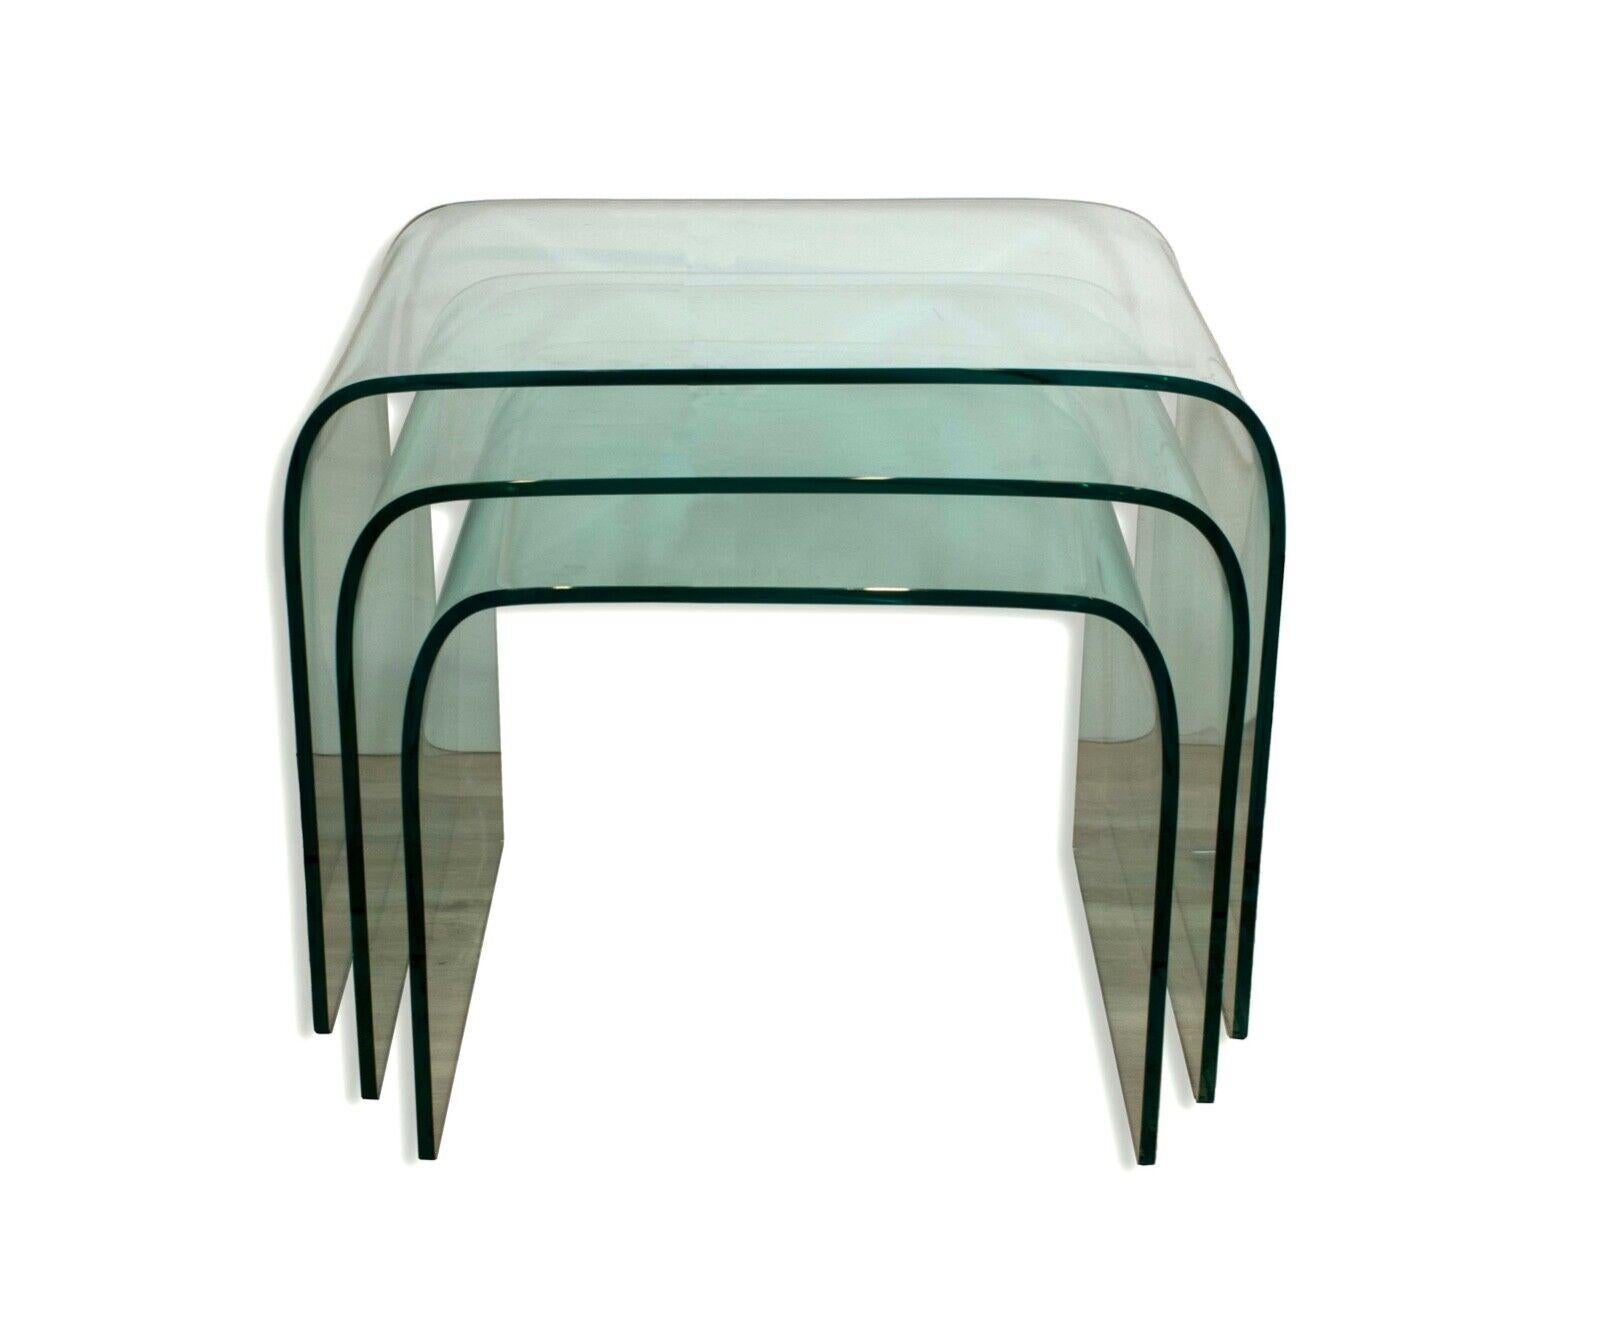 Elevate your living space with the exquisite Set of 3 Angelo Cortesi Fiam Waterfall Glass Nesting Tables. Designed by Angelo Cortesi, these tables seamlessly combine sleek modernity with timeless elegance. Crafted from premium quality glass, each